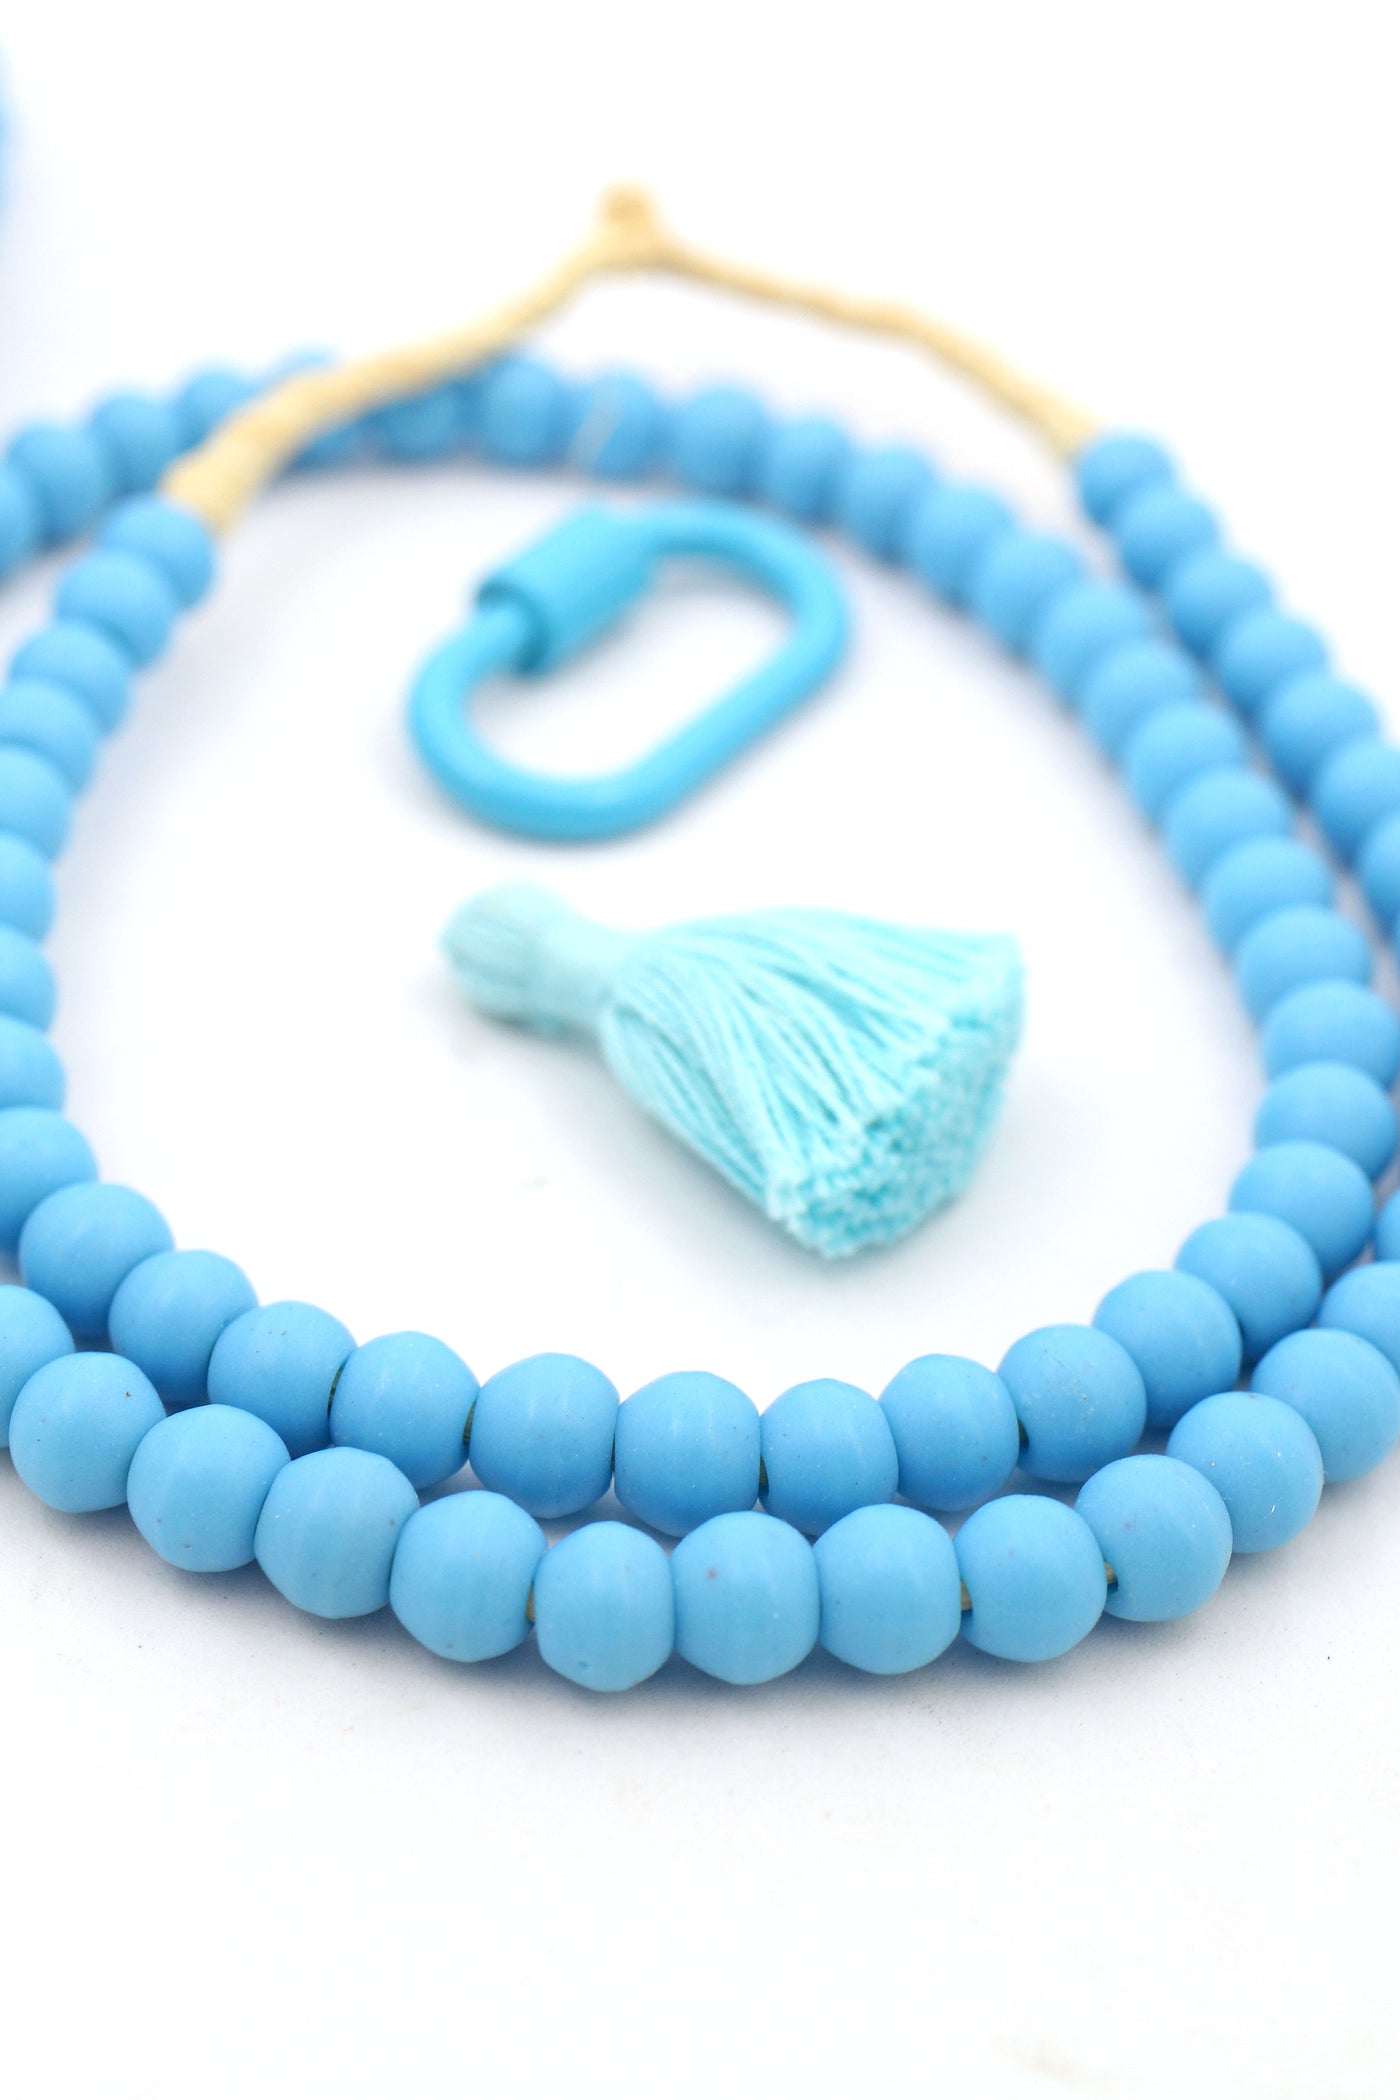 Marine Blue Vintage French Glass Round Beads, Necklace, 8mm